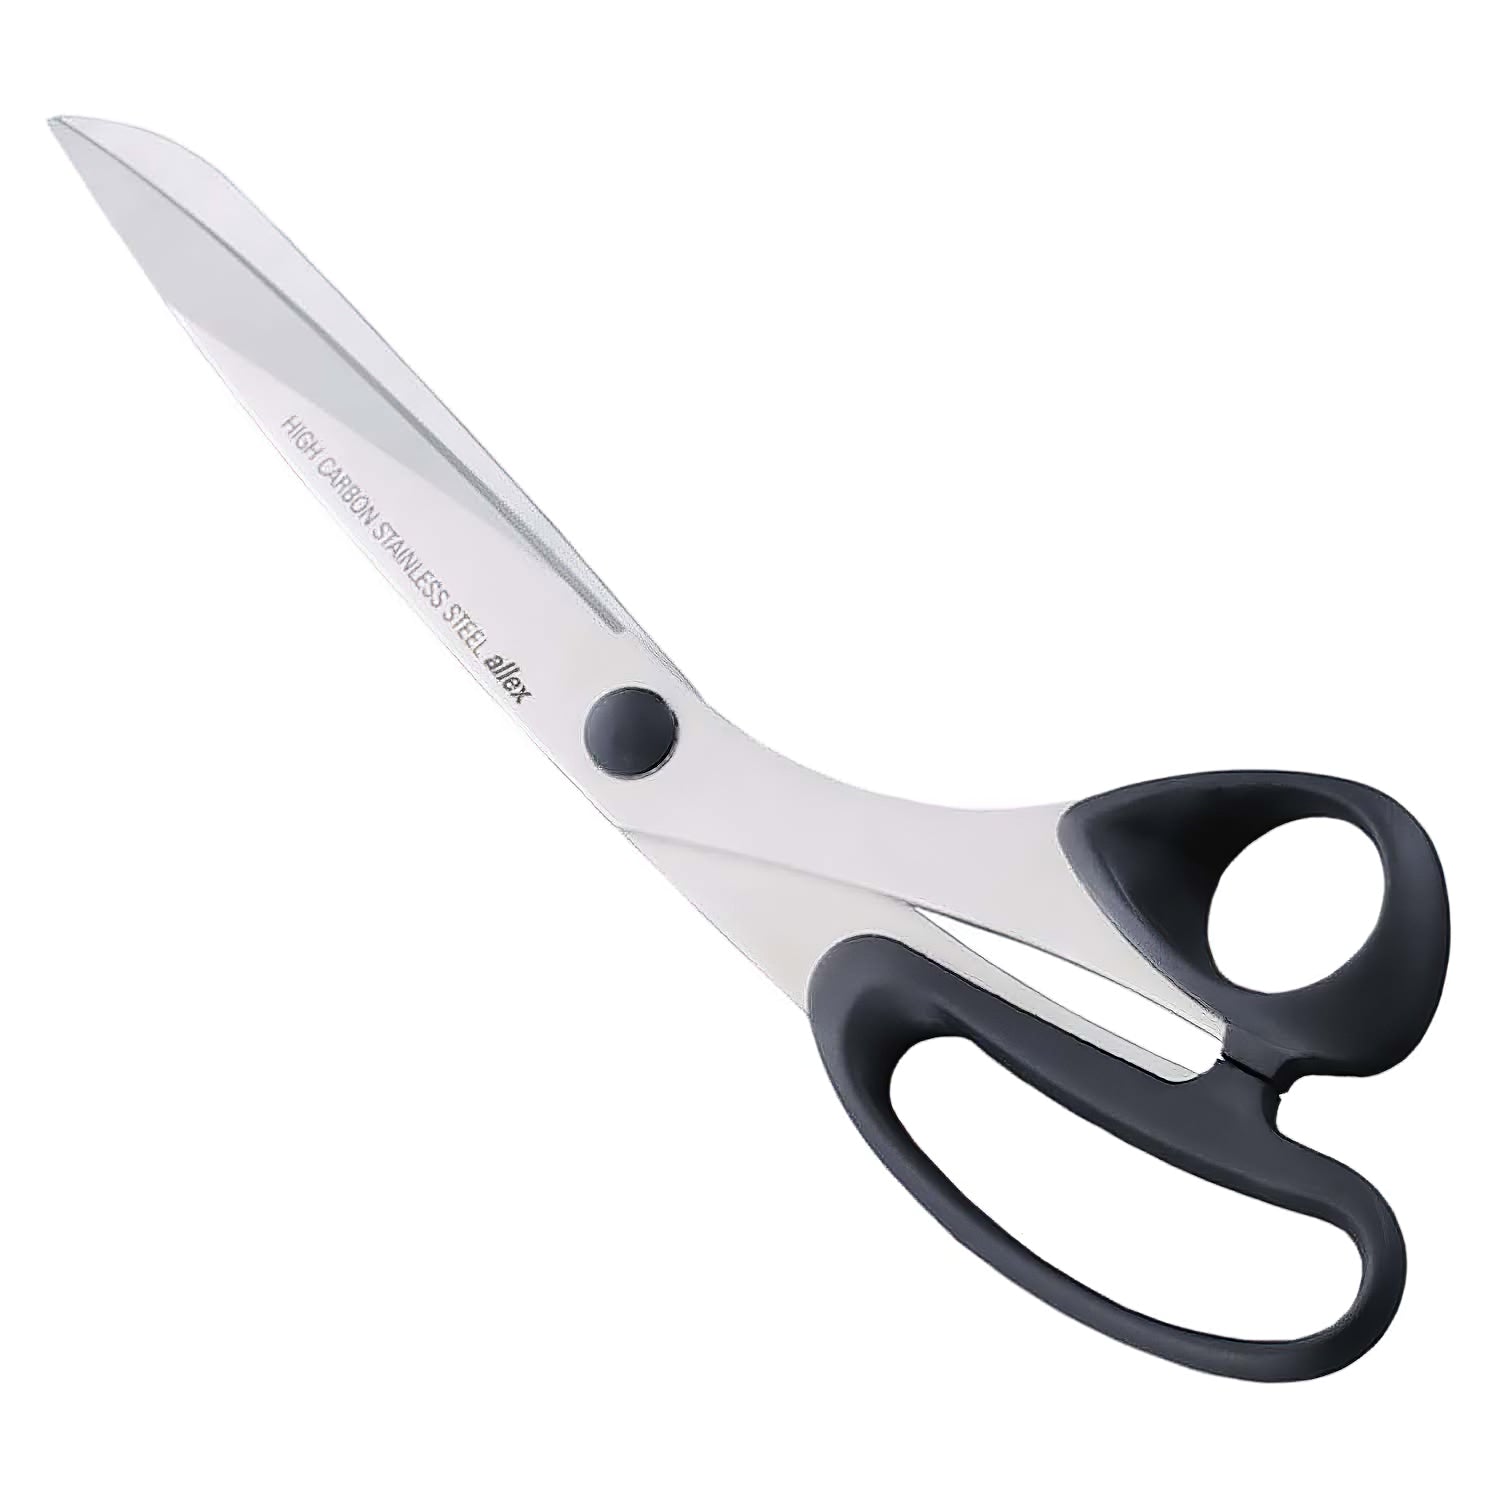 ALLEX Craft Scissors Heavy Duty Sharp Japanese Stainless Steel, Precision  All Purpose Crafting Scissors with Spring Loaded Handle, Made in JAPAN